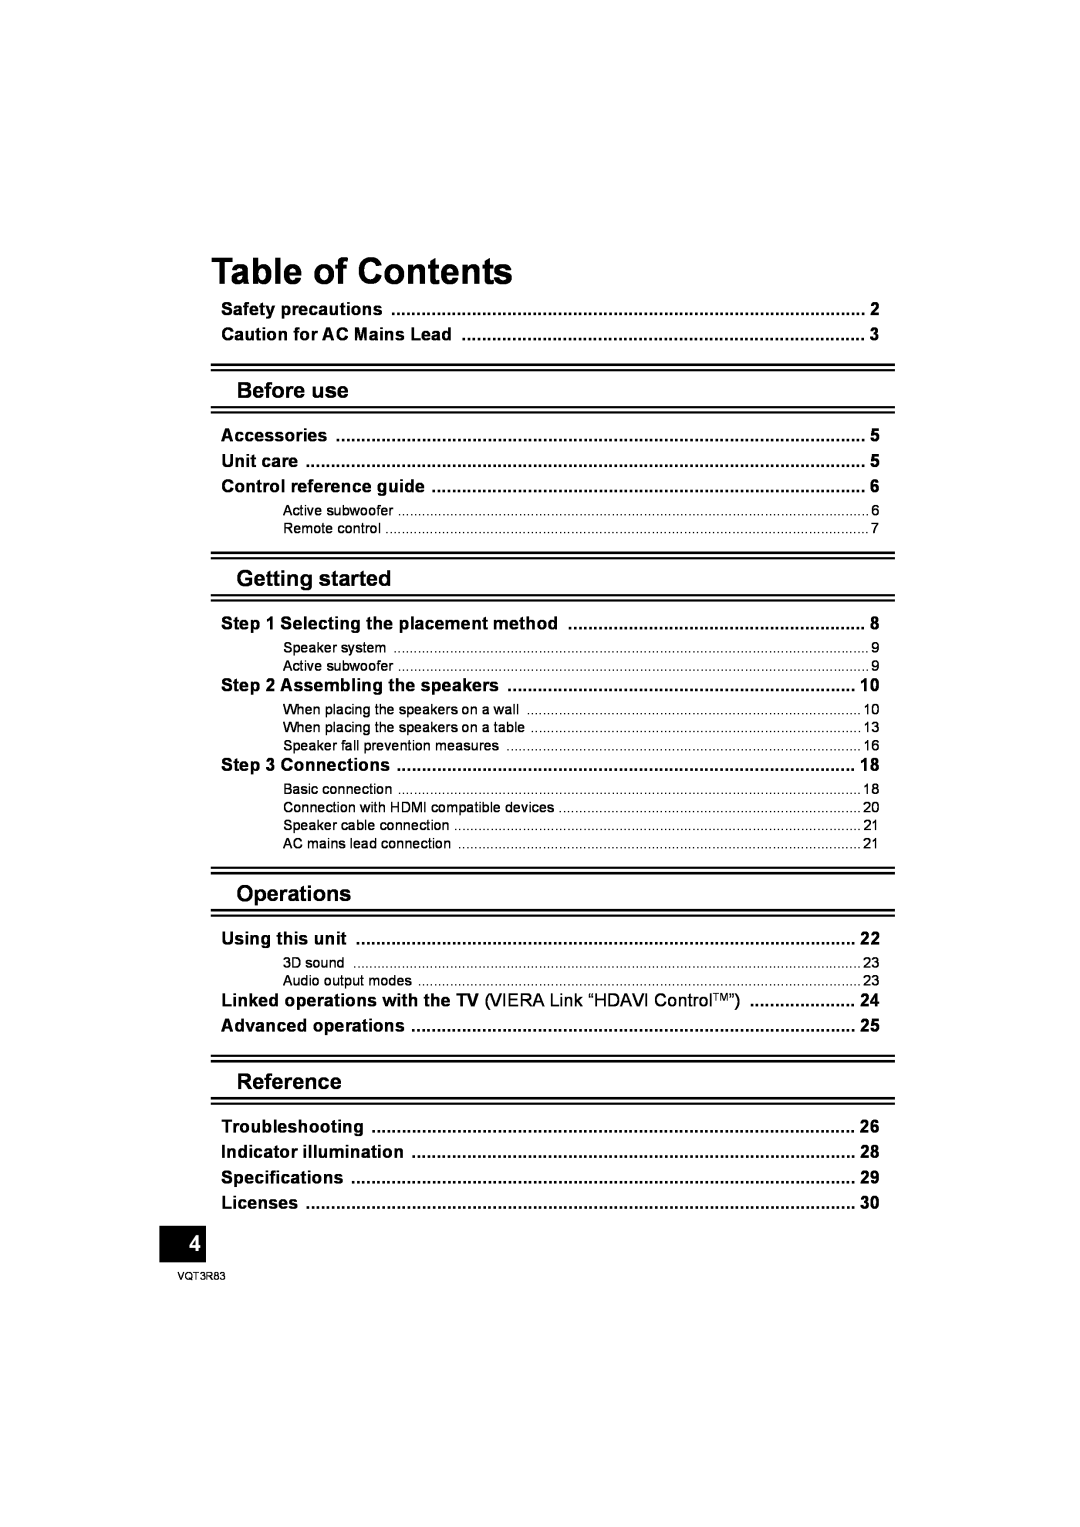 Panasonic SC-HTB15 operating instructions Table of Contents, Before use, Getting started, Operations, Reference 